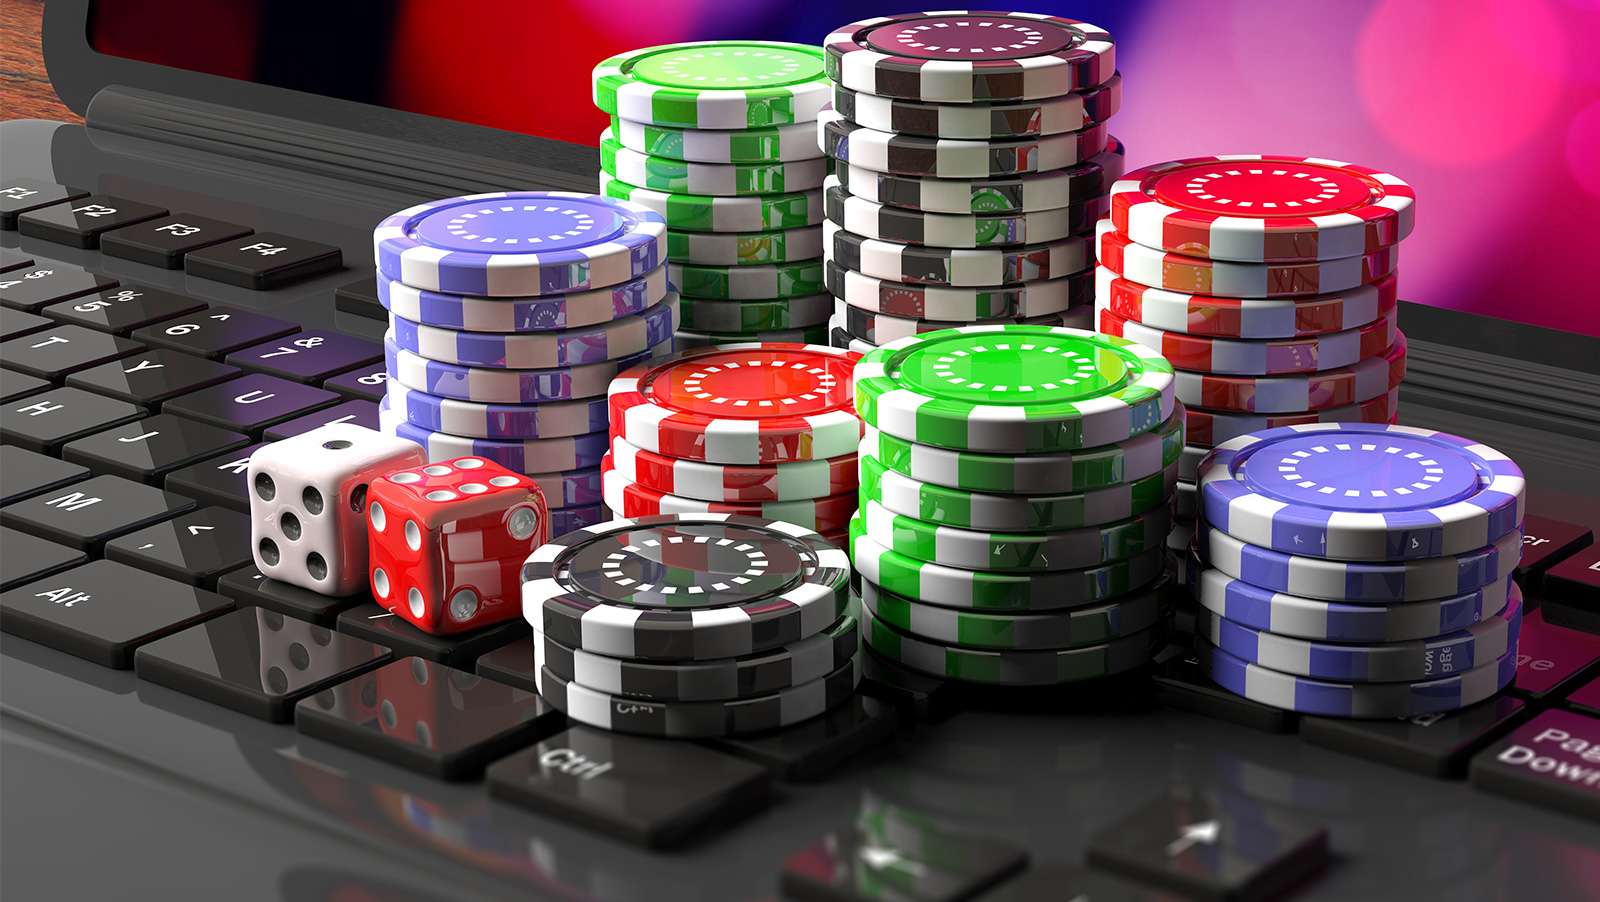 High 5 Games and GAN Partner for A New Online Casino Content Deal